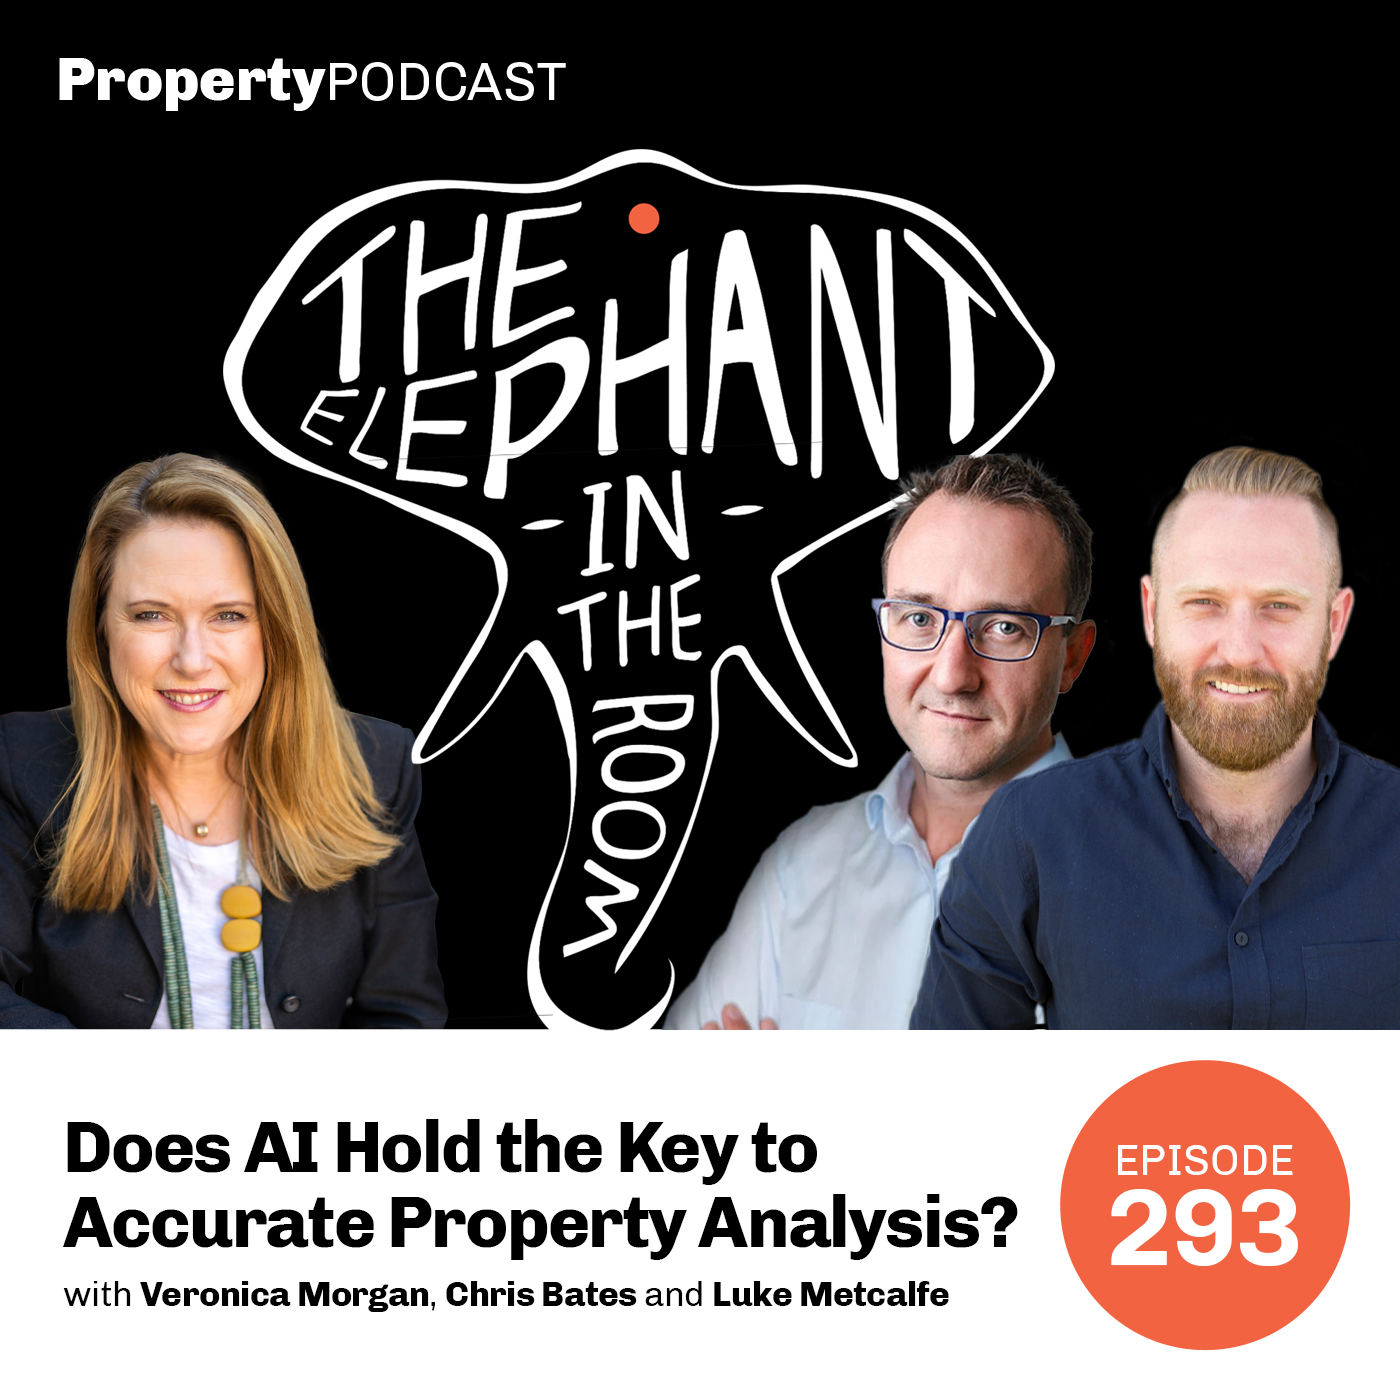 Does AI Hold the Key to Accurate Property Analysis?